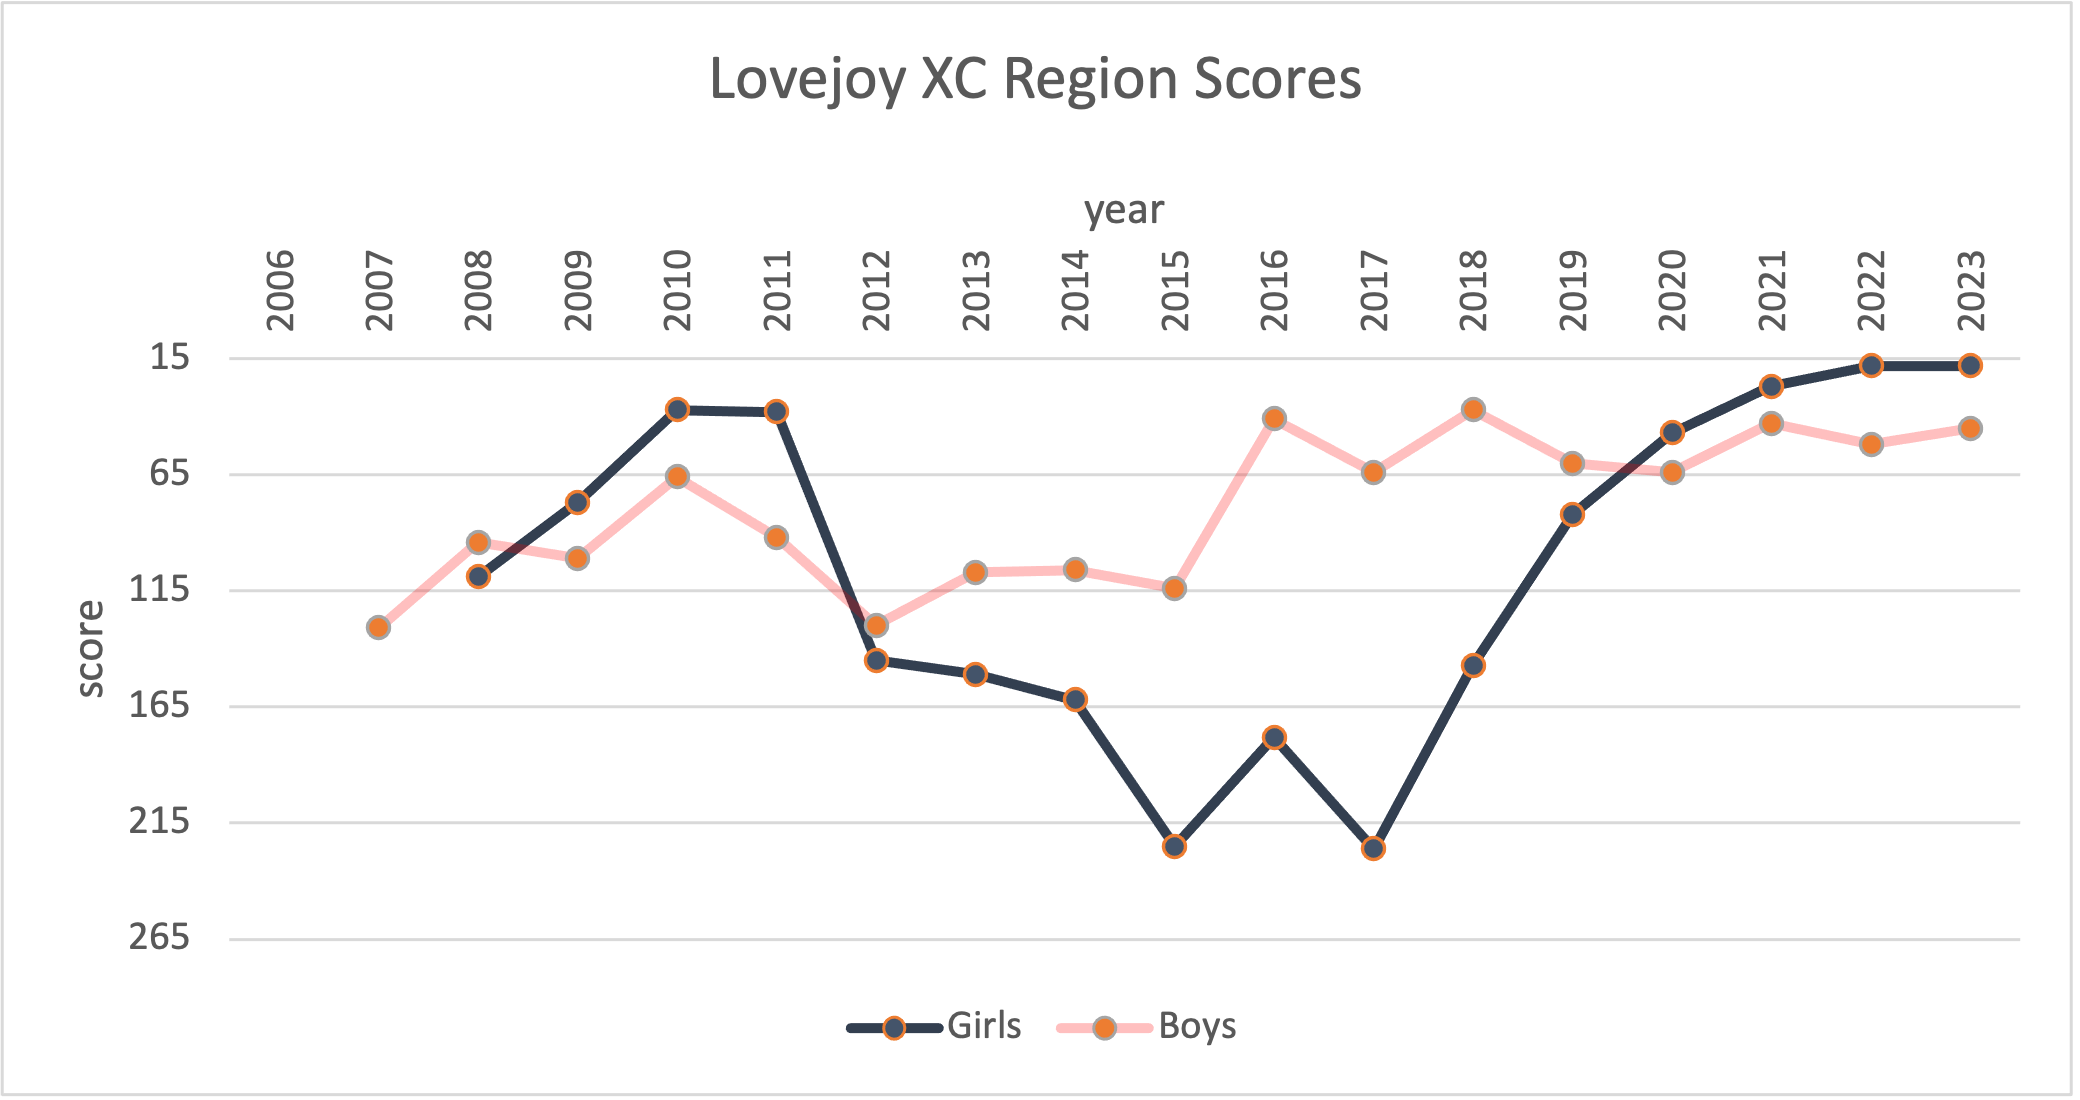 history of Lovejoy's scores at the UIL Region II XC Championships